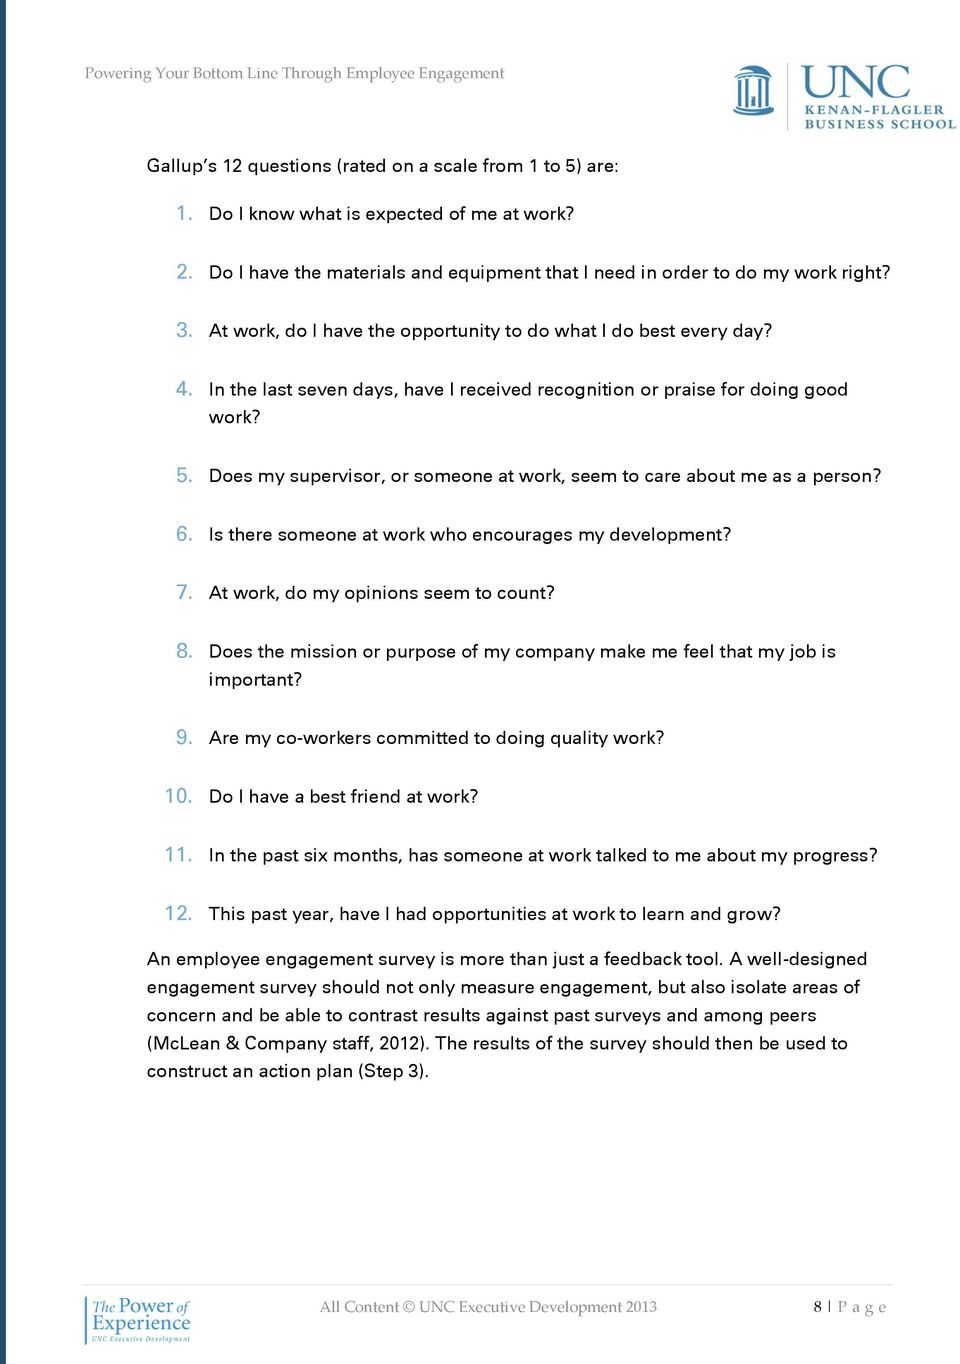 Does my supervisor, or someone at work, seem to care about me as a person? 6. Is there someone at work who encourages my development? 7. At work, do my opinions seem to count? 8.